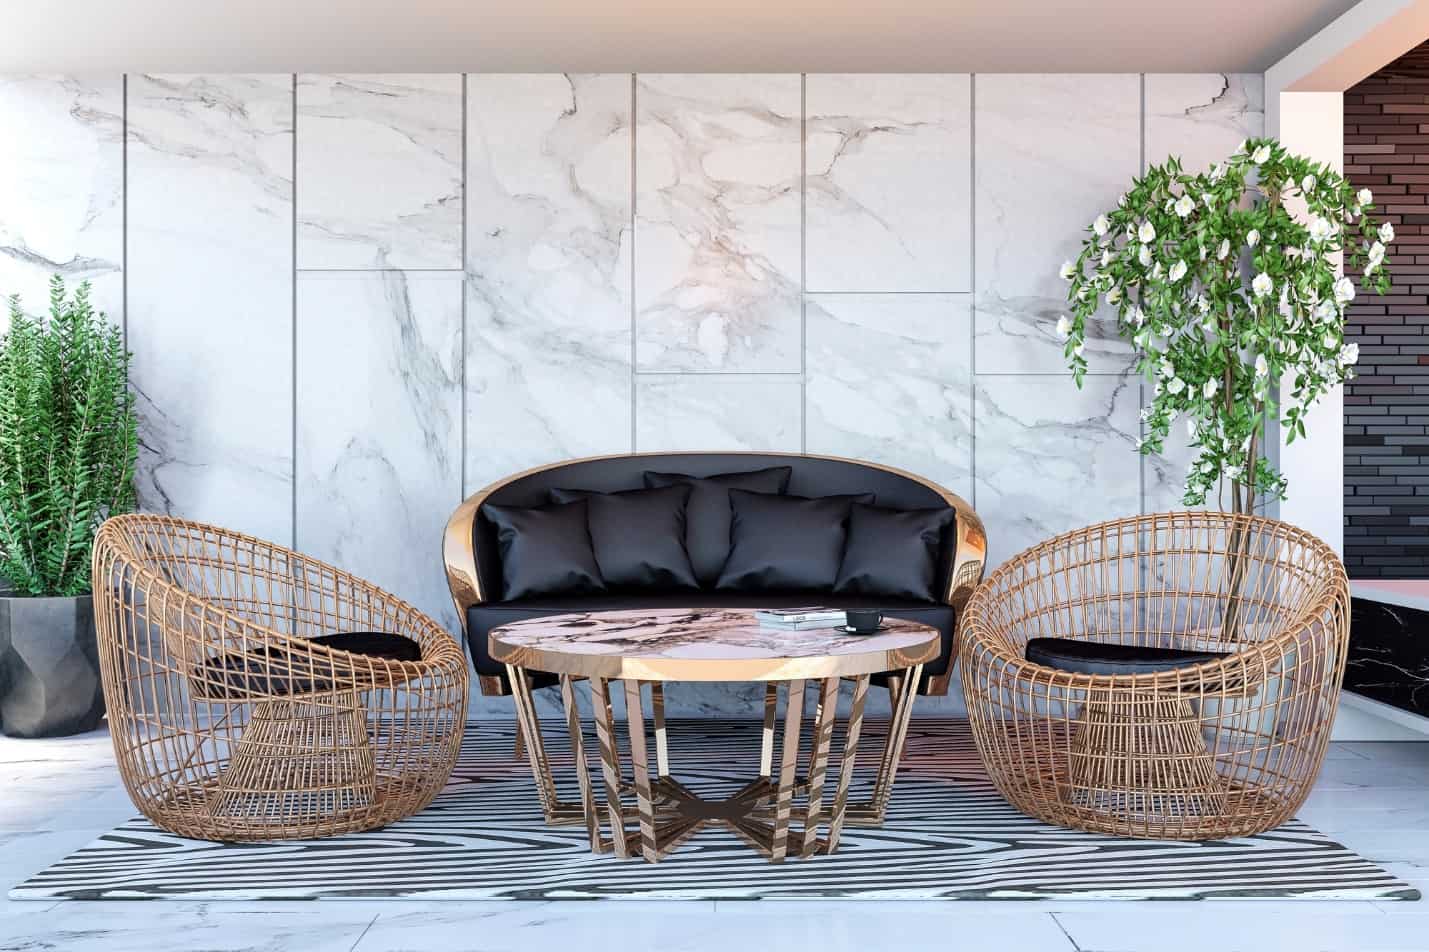 All About the Rattan Furniture